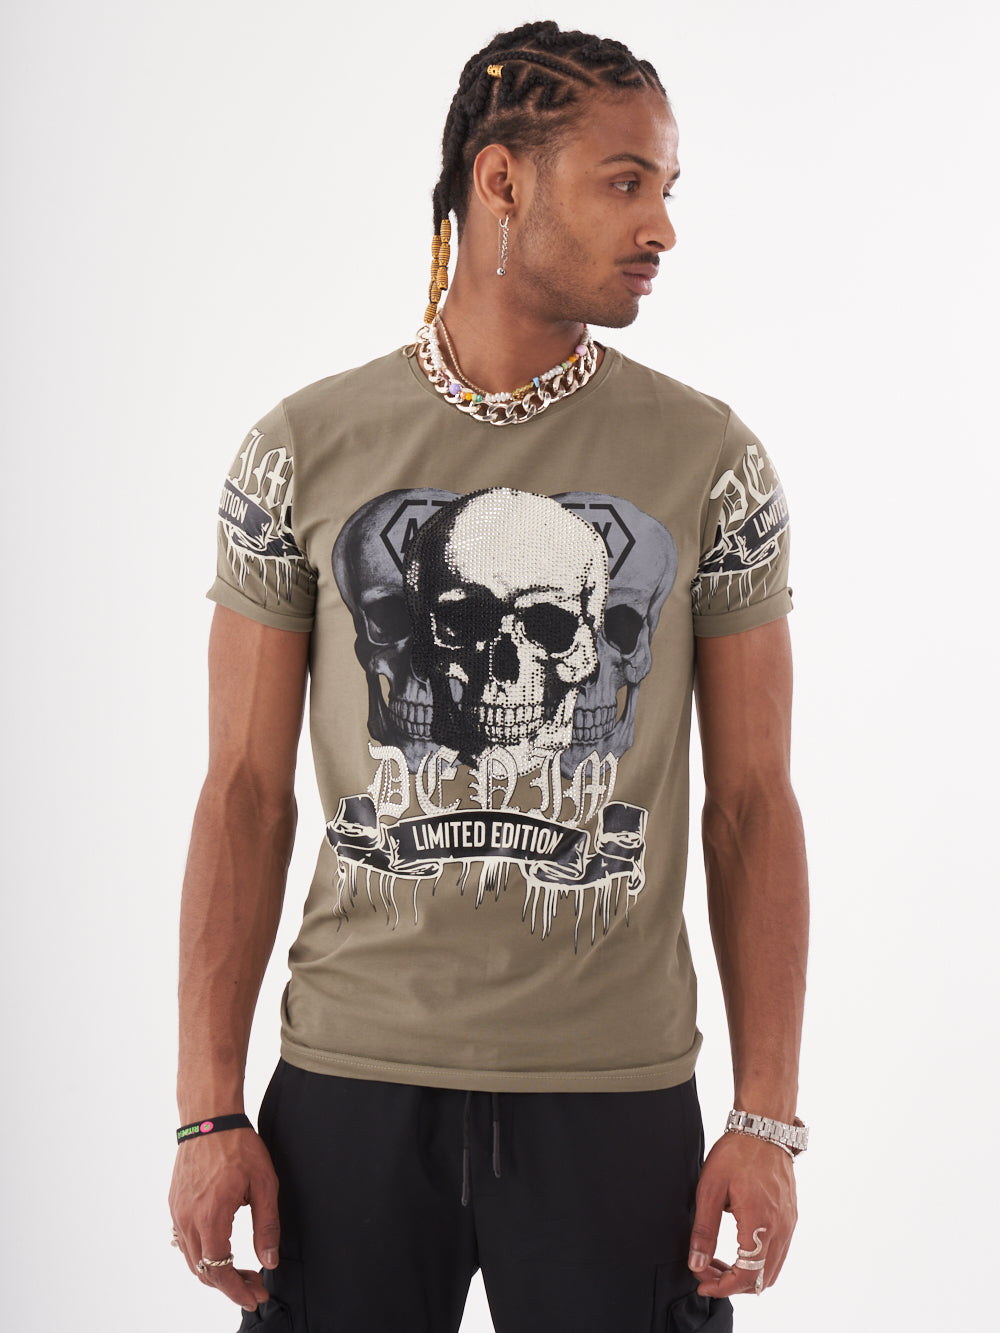 A man wearing a SKULL CRUSHER T-SHIRT | GREEN with skulls on it.